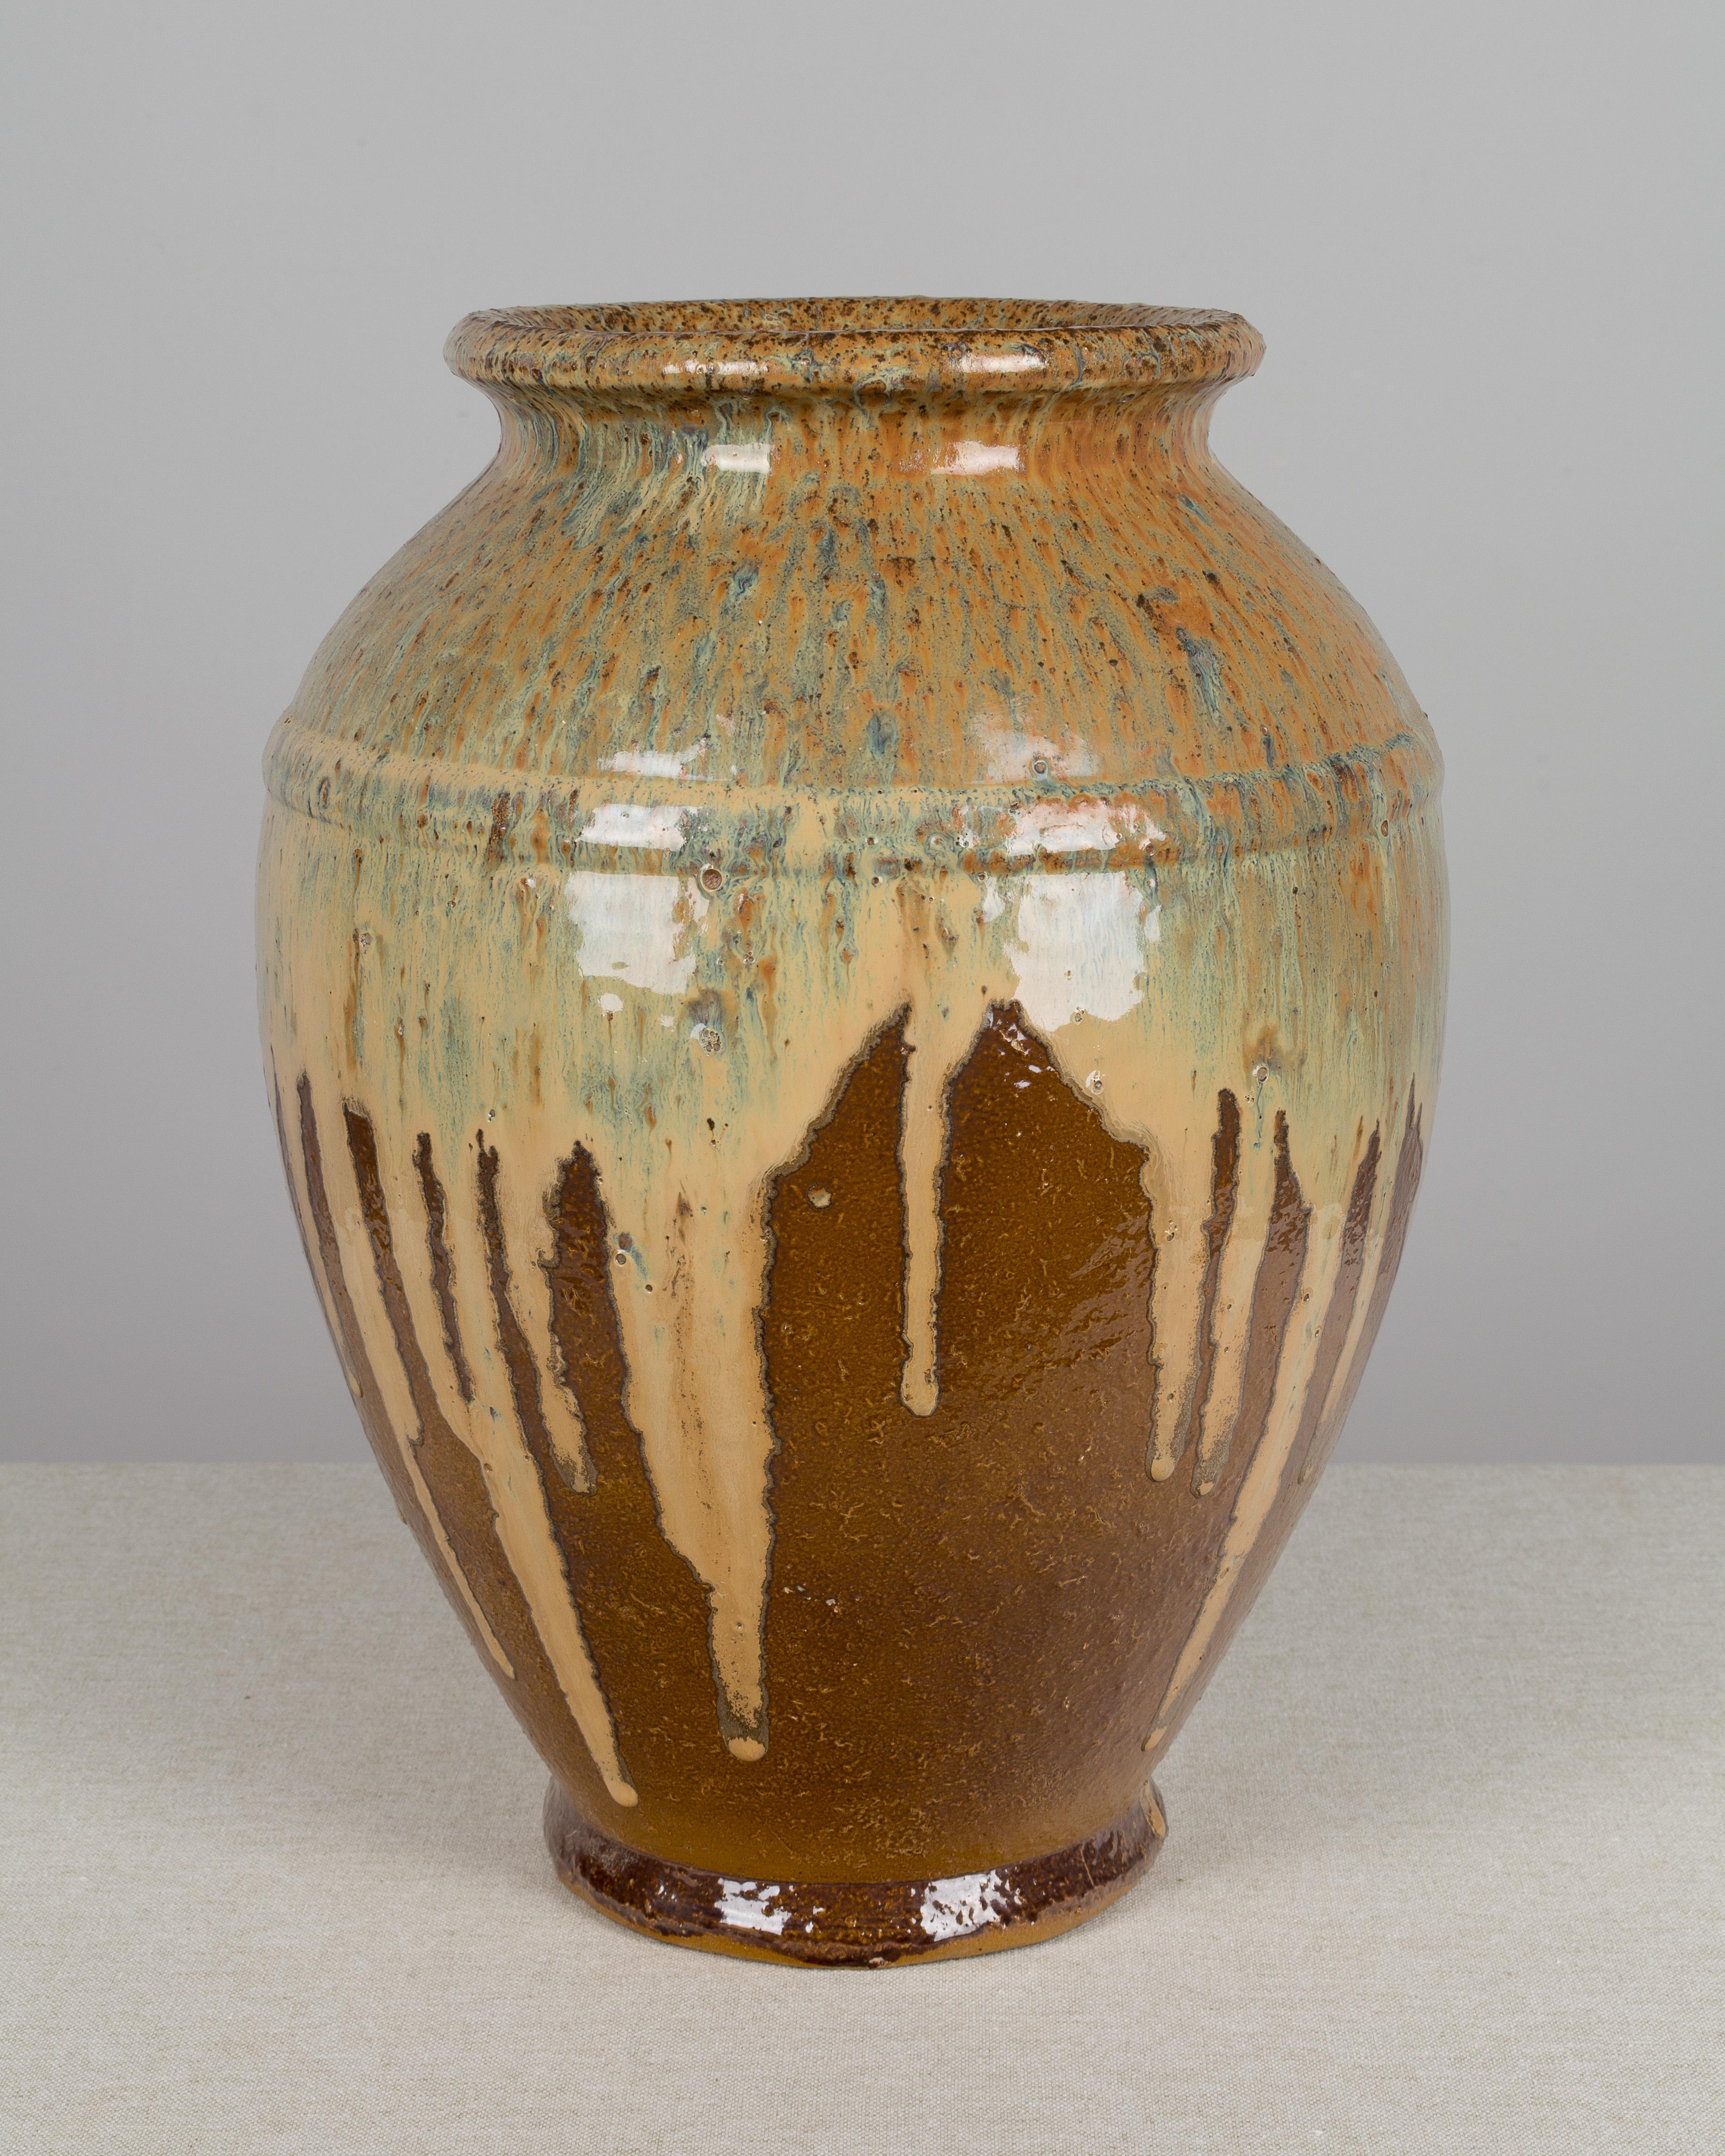 A French pottery vase from Beauvais in the North of France. Large heavy terracotta form with beautiful drip glaze. 18.5 lbs.